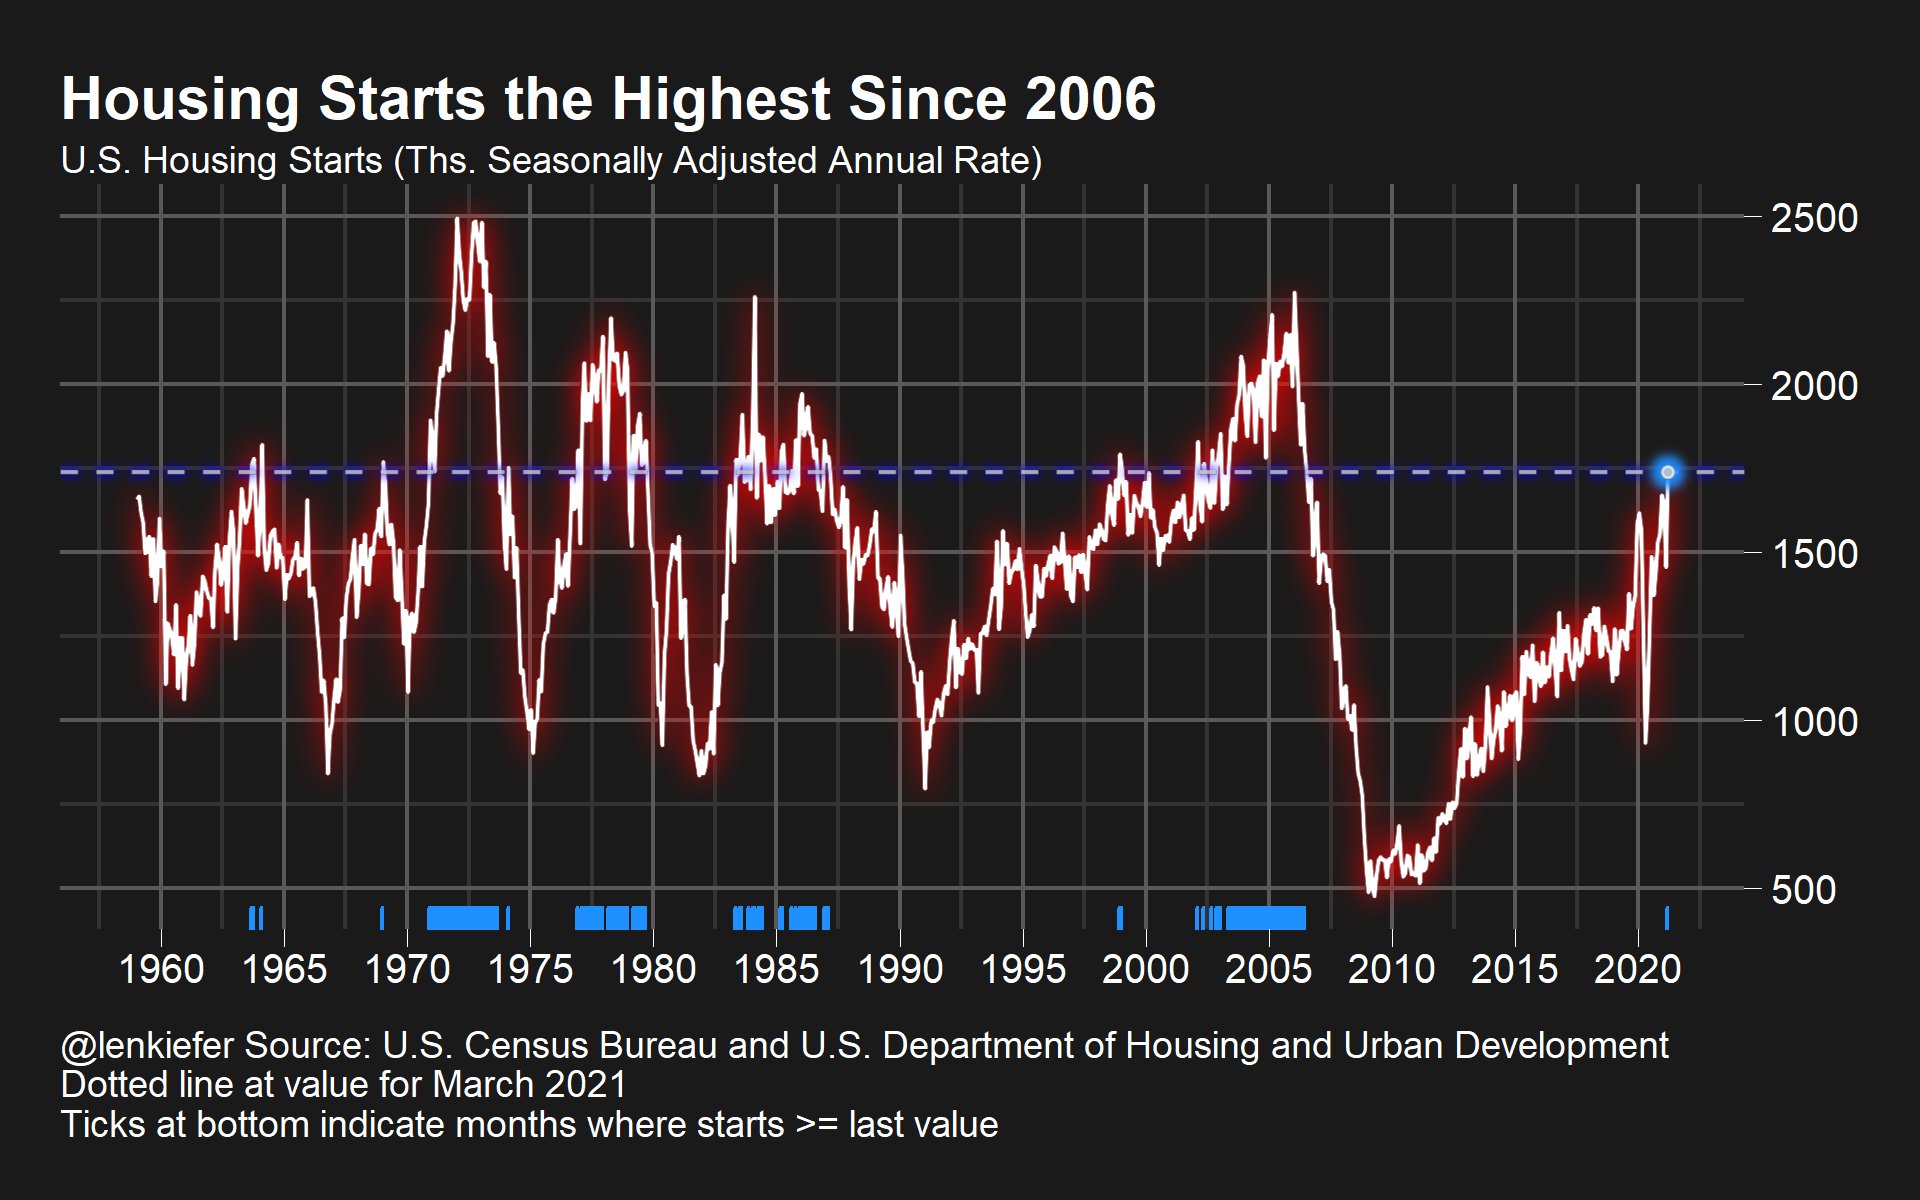 Time series US housing starts
March 2021 highest since 2006